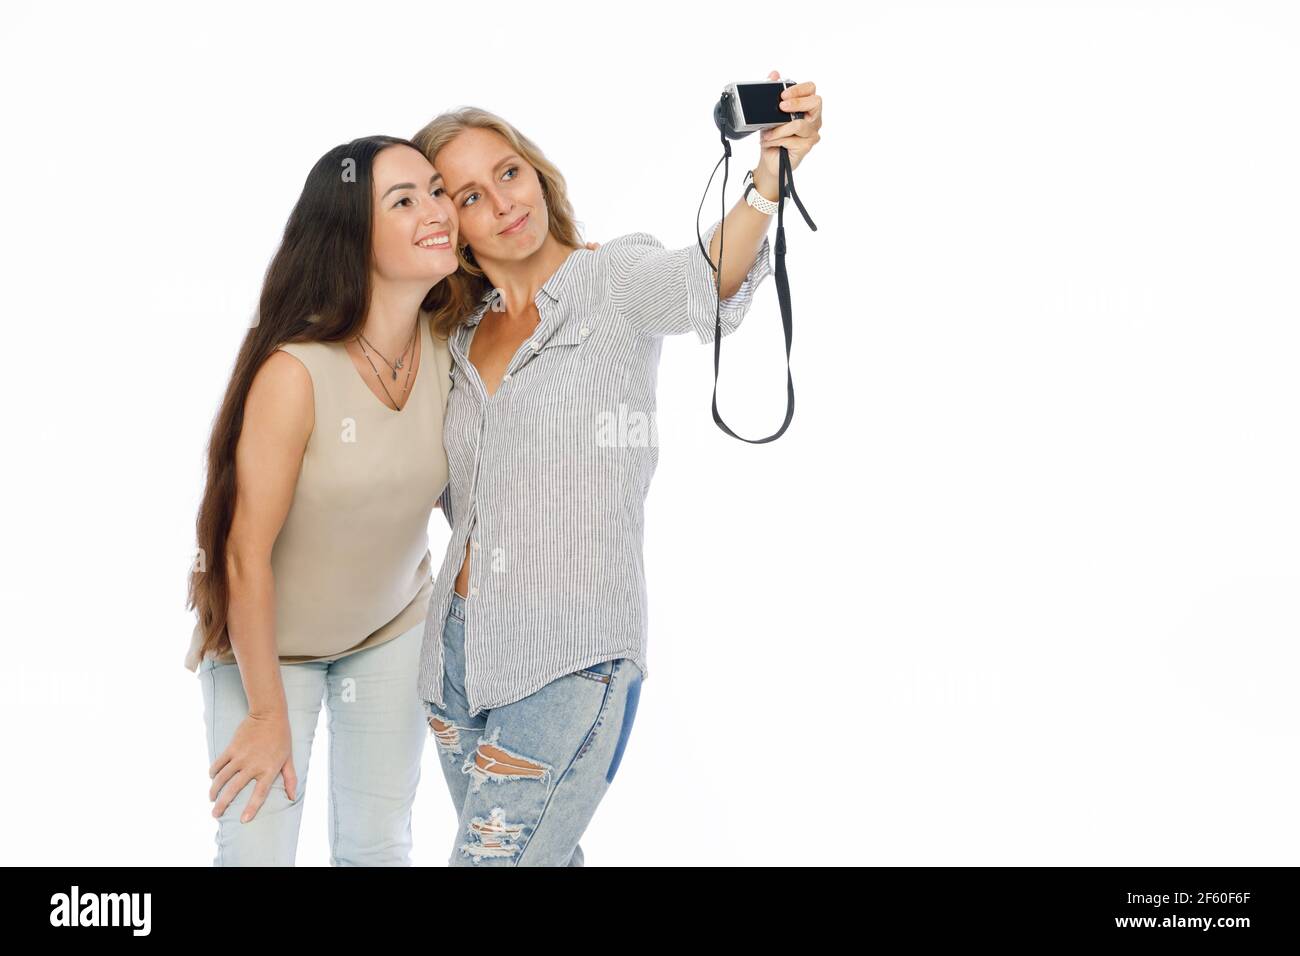 Positive friends portrait of two happy young women making selfie, sure funny faces, joy, emotions, casual style, pastel colors. Lifestyle concept. Stock Photo